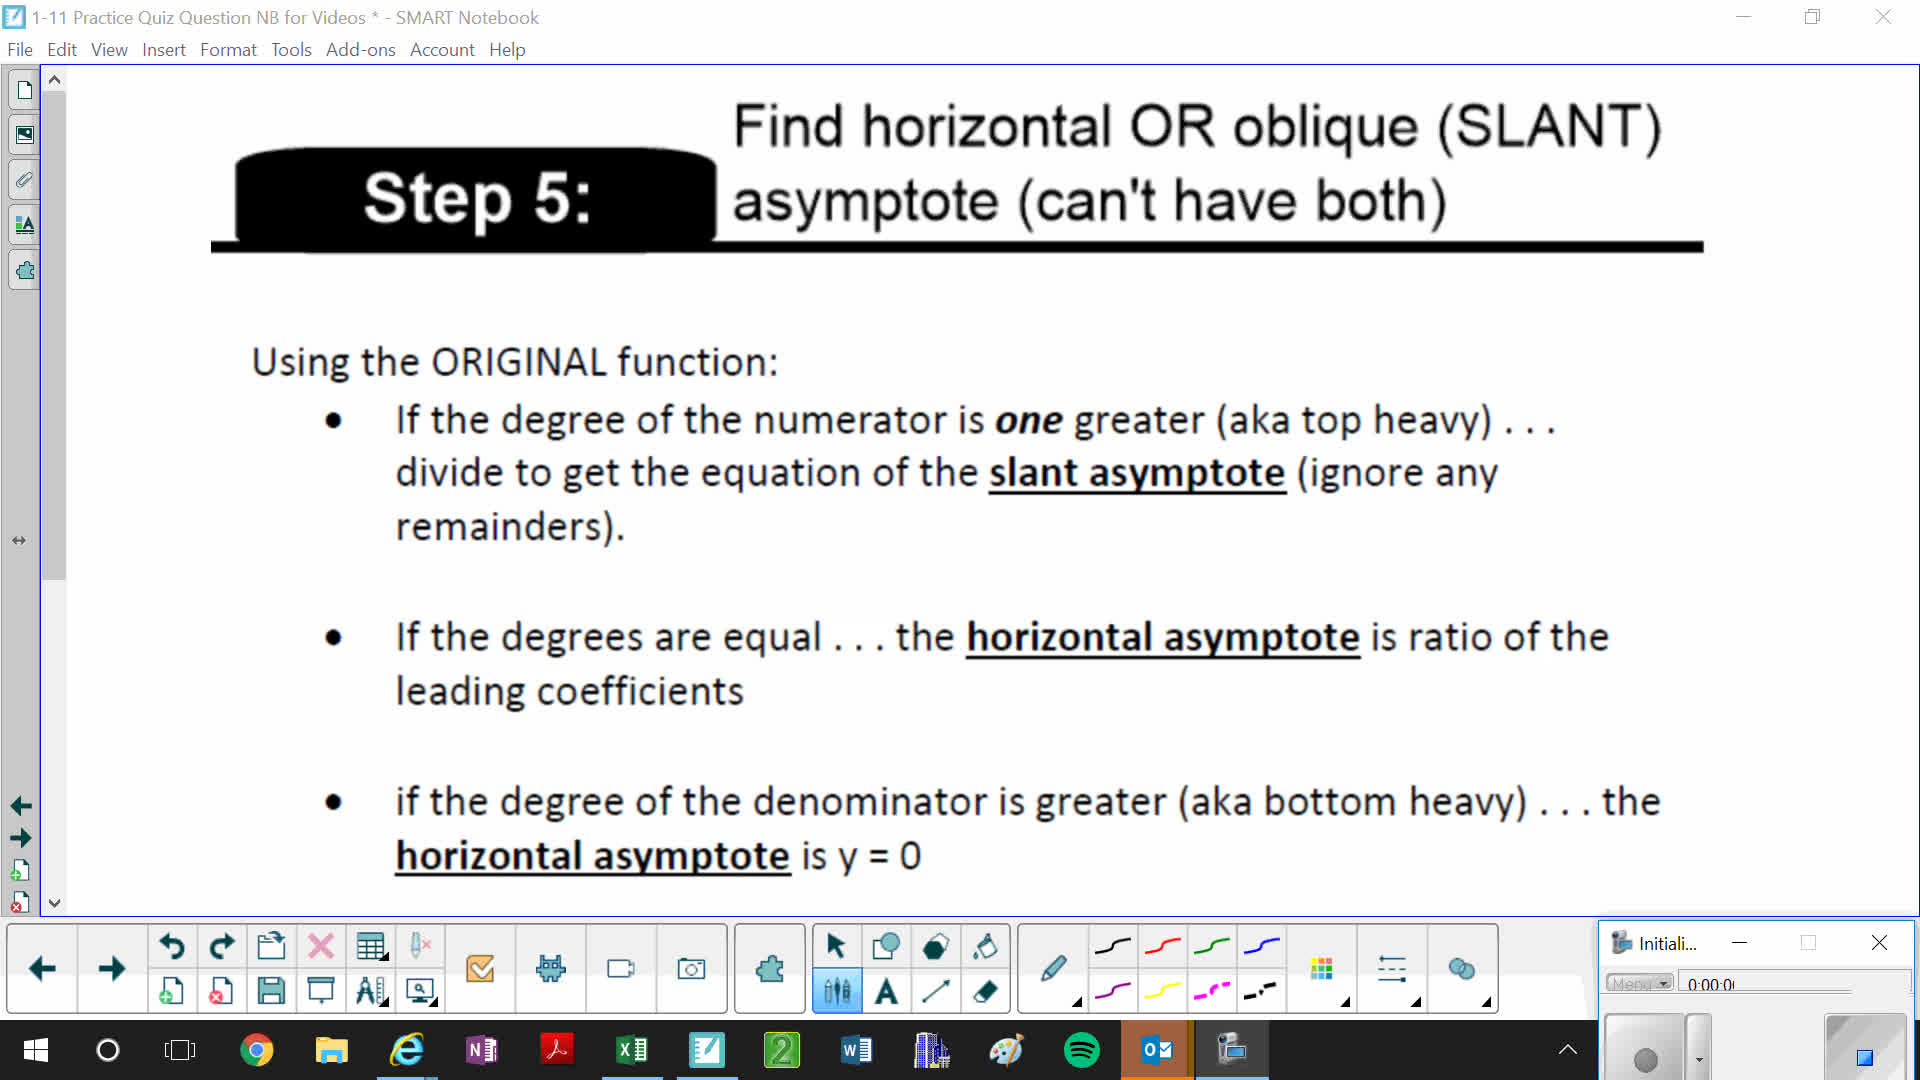 Finding the Horizontal OR Slant Asymptote of a Rational Function